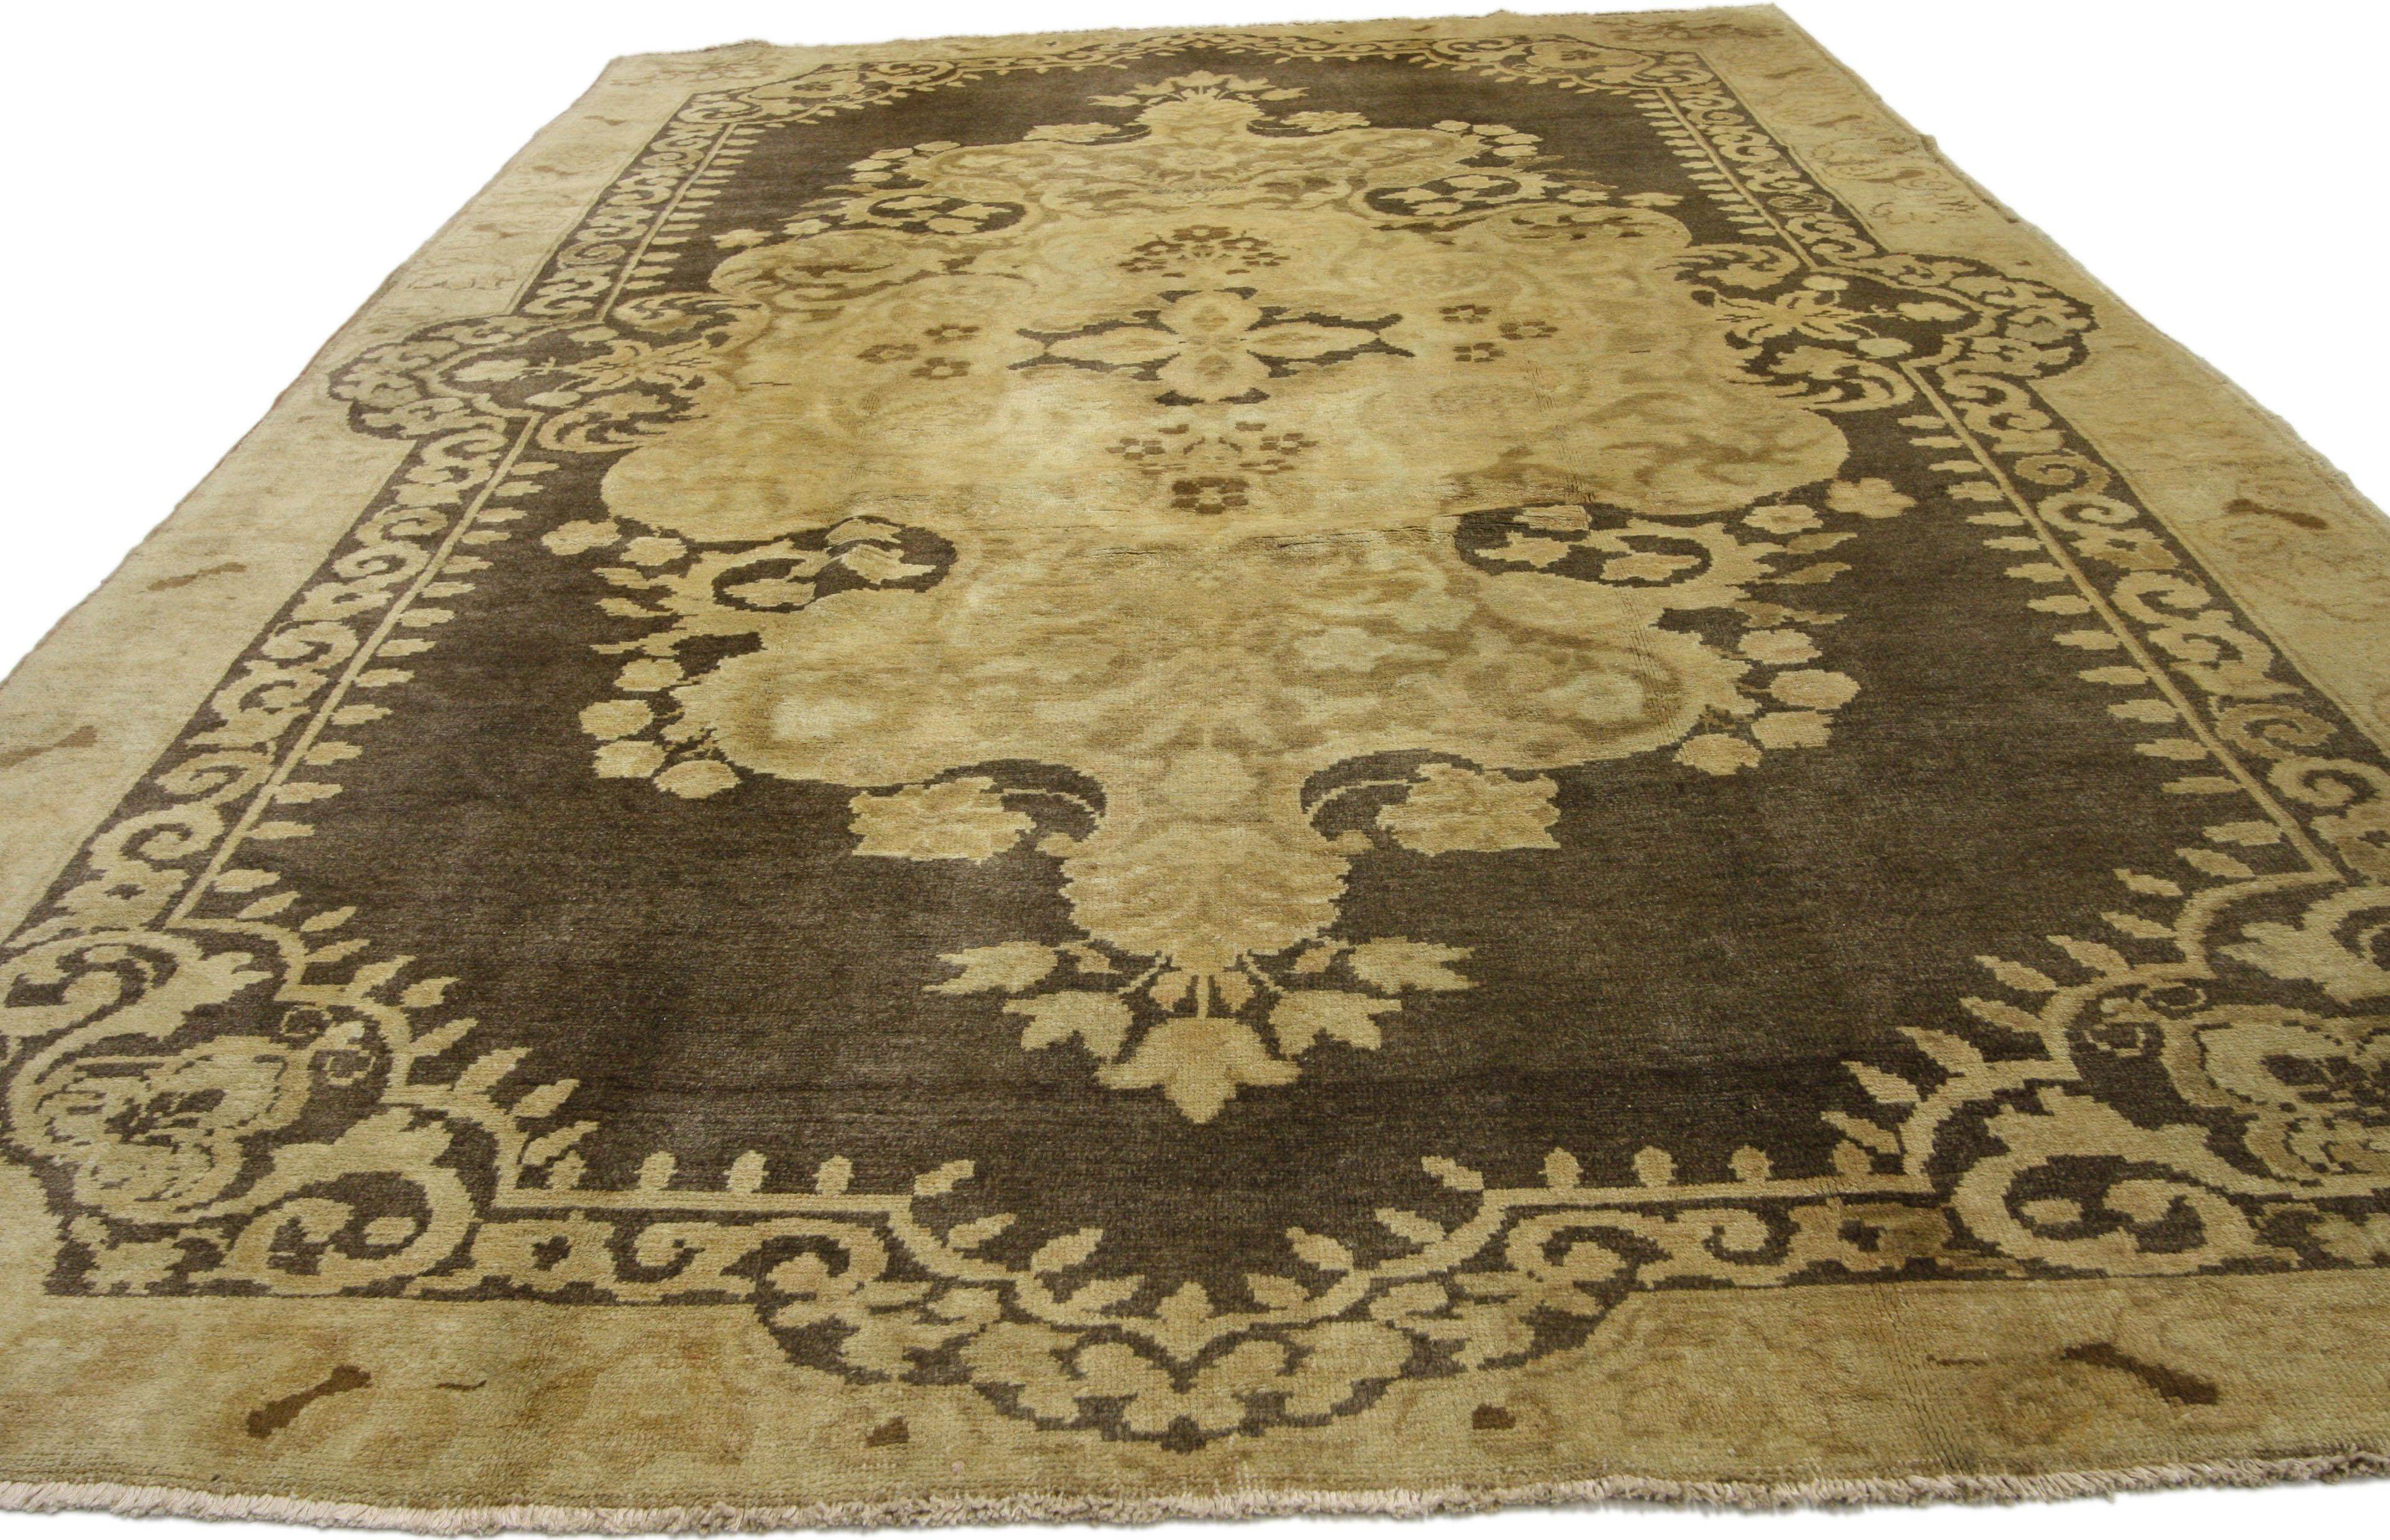 50042 Vintage Turkish Oushak Rug with Warm, Neutral Colors 06'11 x 11'00. A grand golden hued filigree medallion with an undulating border replete with floral sits regally on a rich coffee colored field in this luxurious, neutral area rug. The